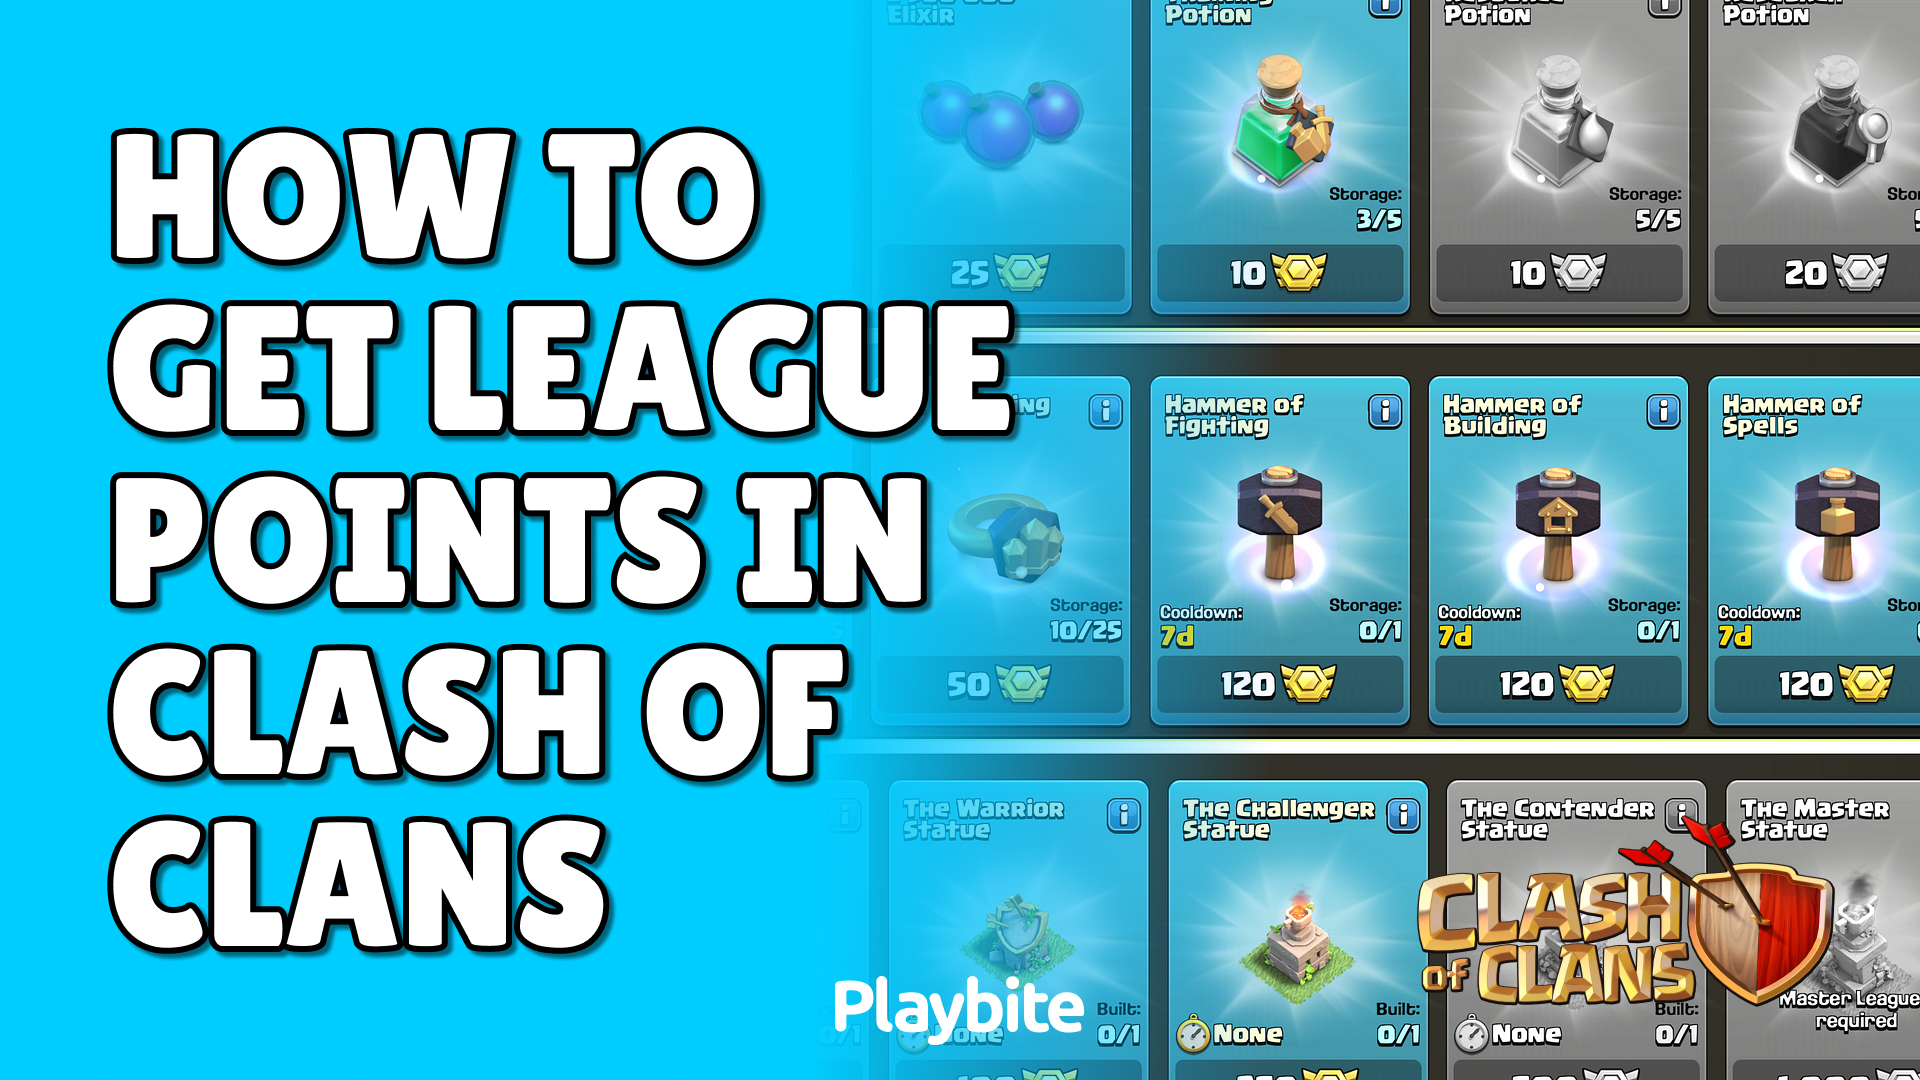 How To Get League Points In Clash Of Clans